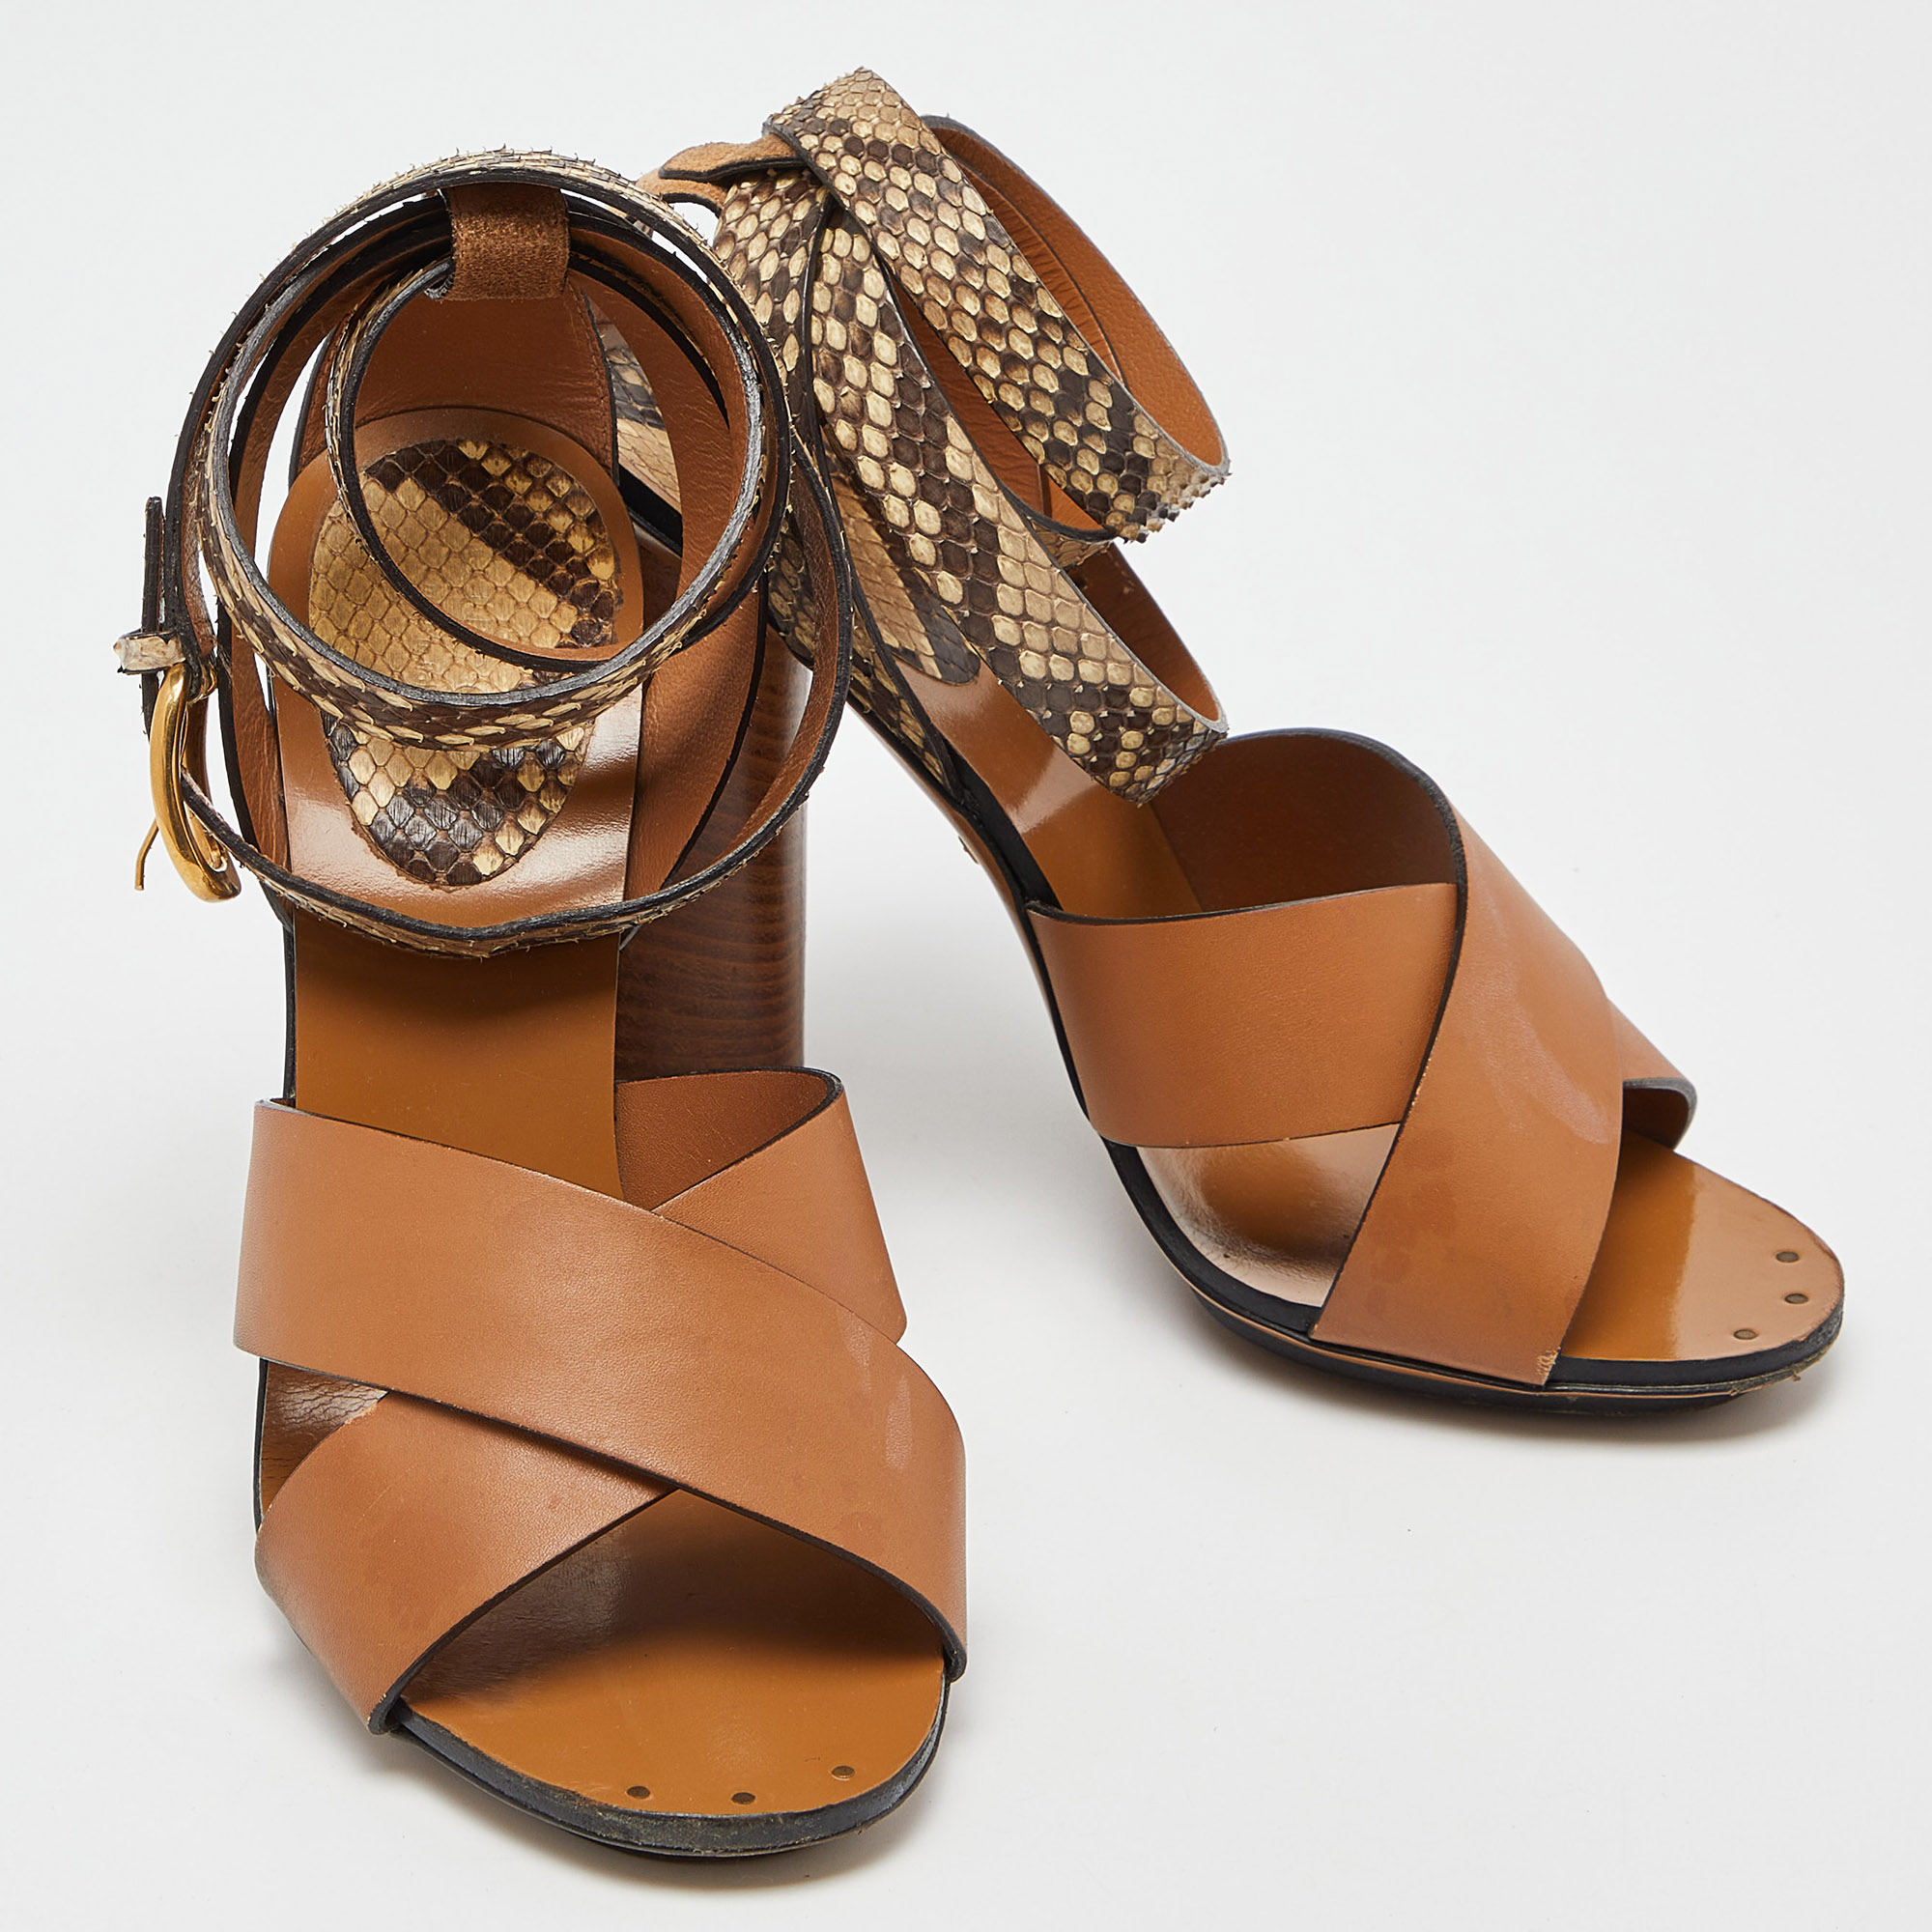 Gucci Brown Python And Leather Crisscross Ankle Strap Sandals Size 35